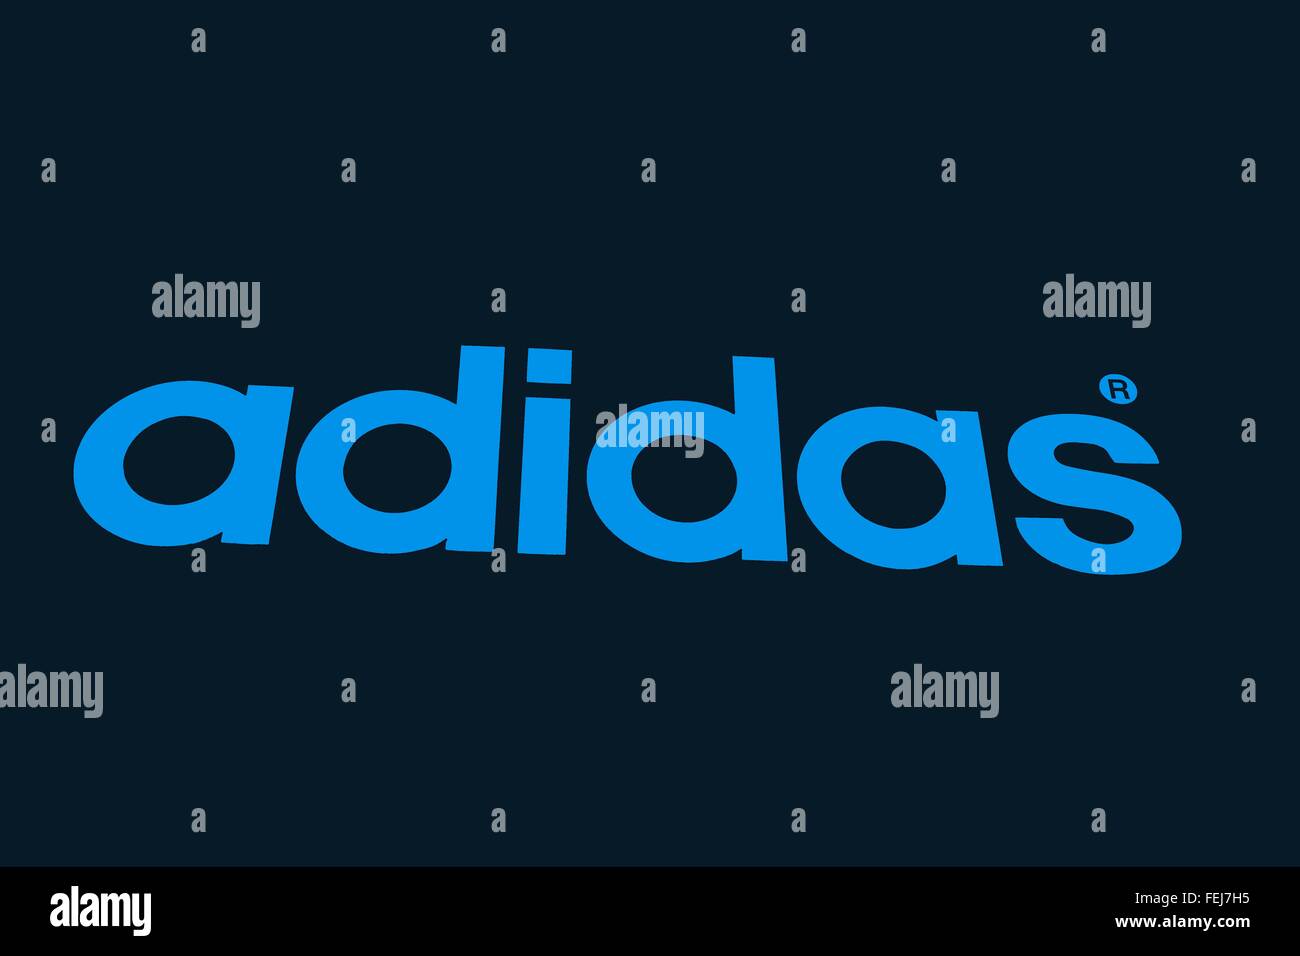 The adidas AG is a German manufacturer of sporting goods brands Adidas ...